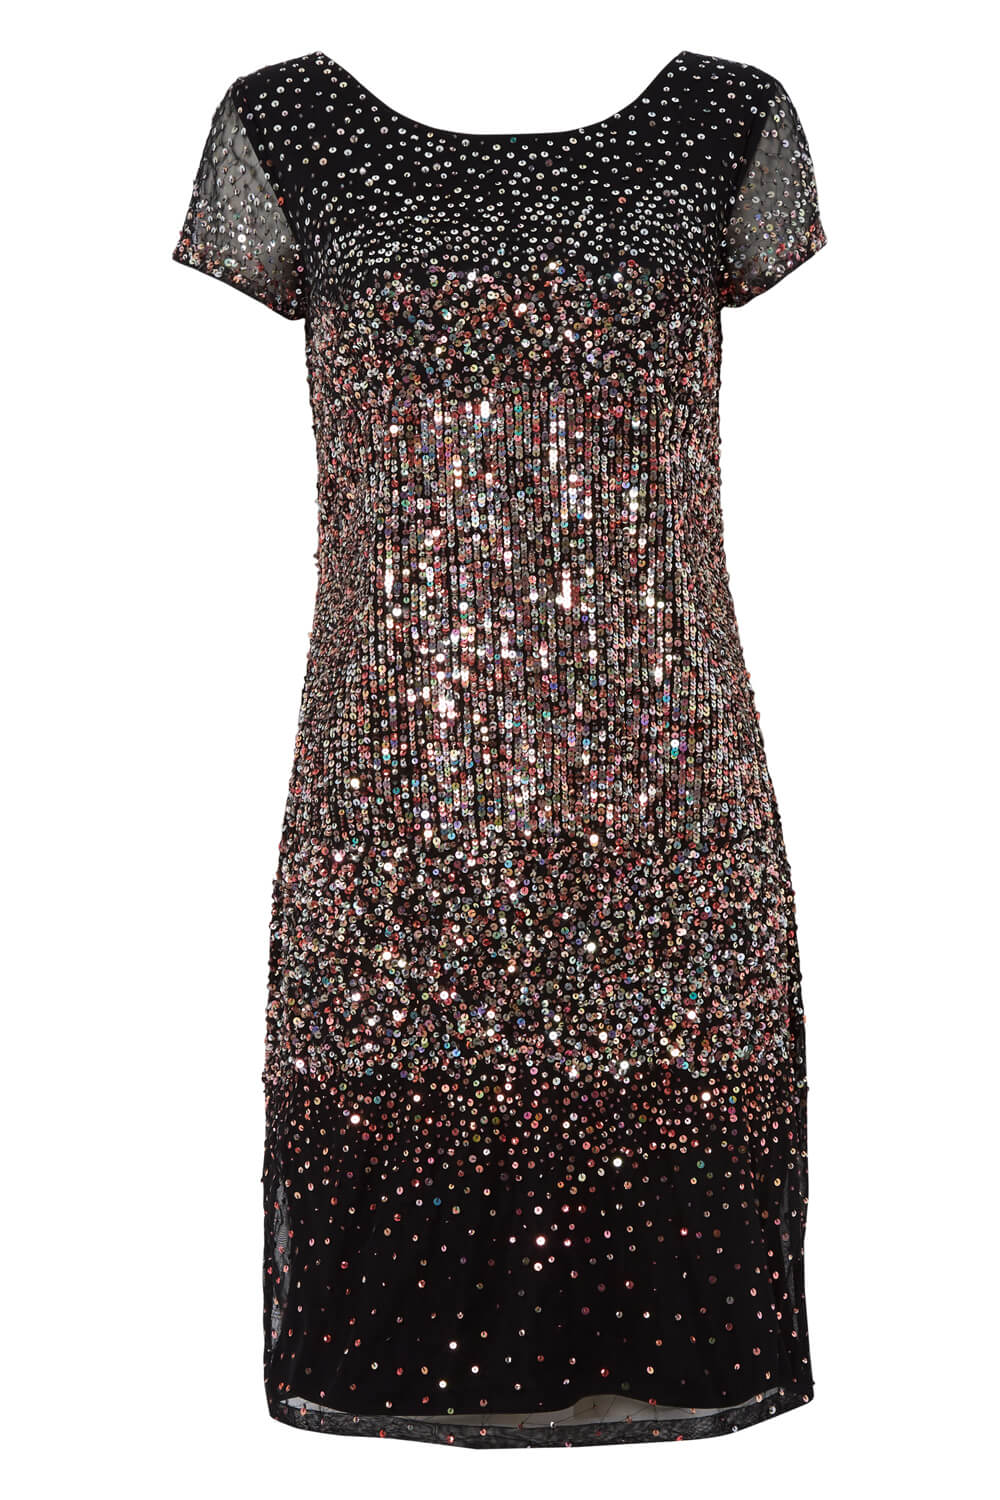 PINK Ombre Sequin Dress, Image 5 of 5